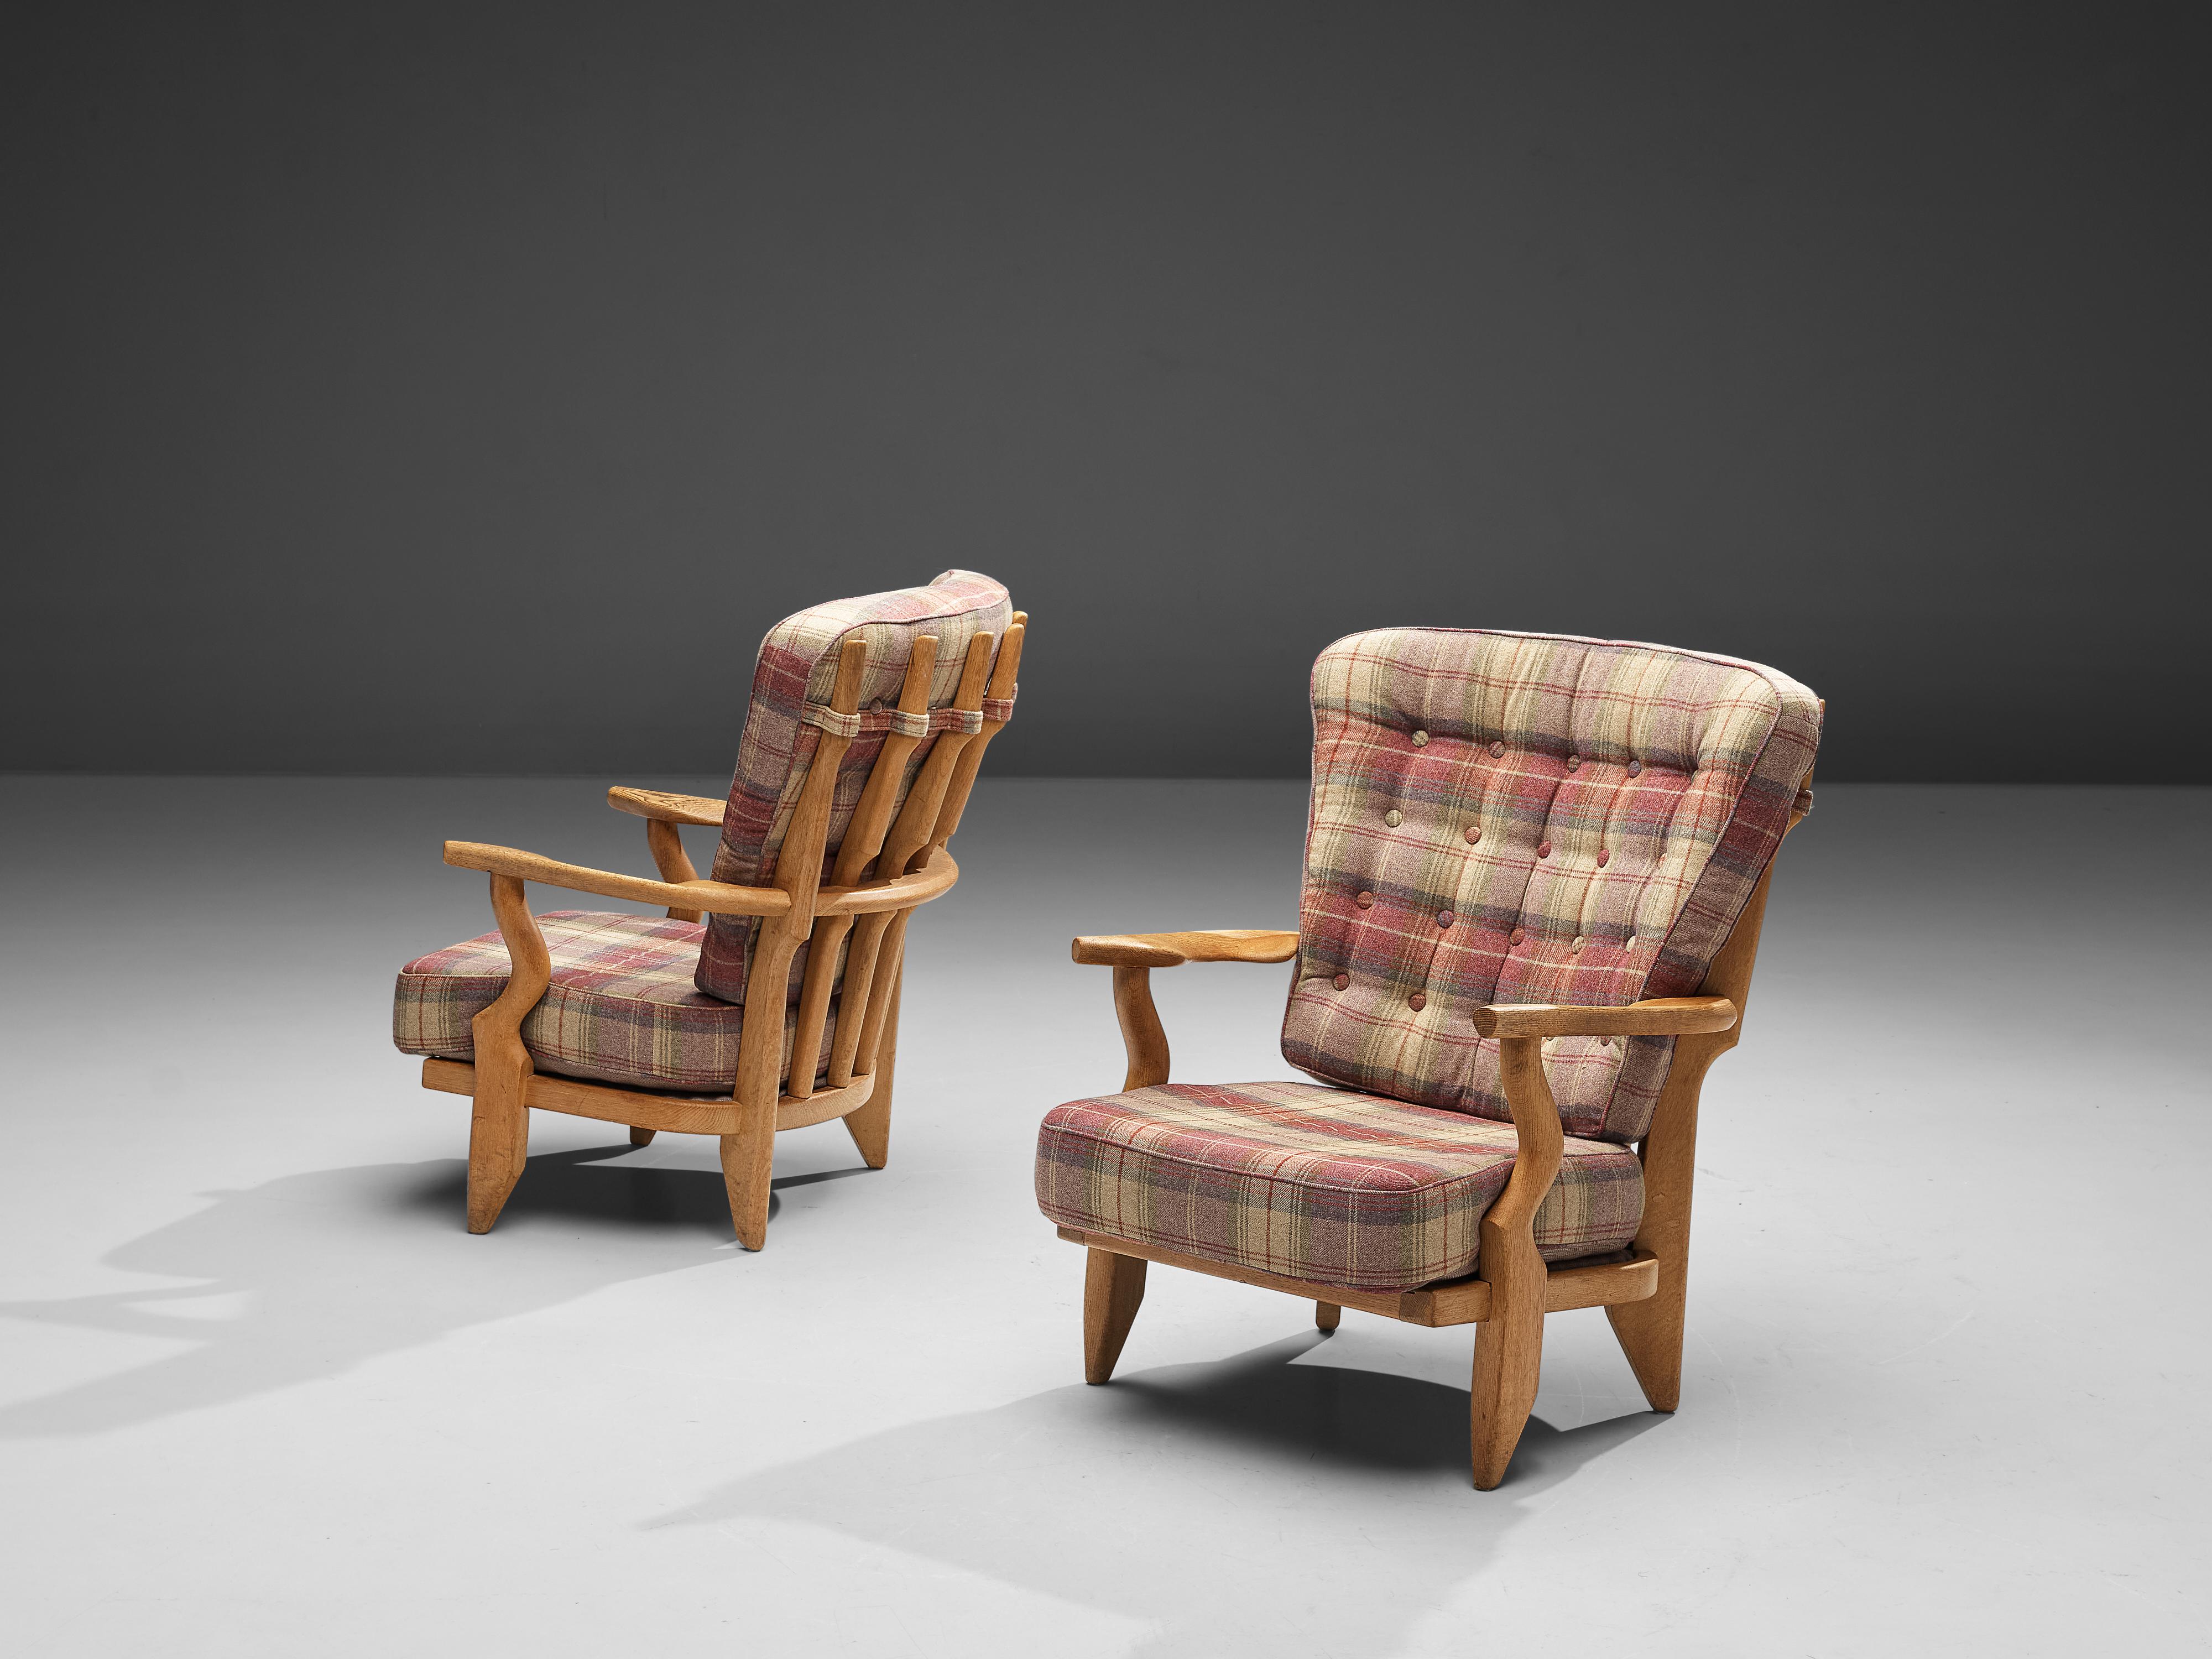 Guillerme & Chambron, pair of 'Mid' Repos lounge chair, oak, upholstery, France, 1960s

Guillerme & Chambron are known for their high quality solid oak furniture, from which these are another great example. The chairs have an interesting,